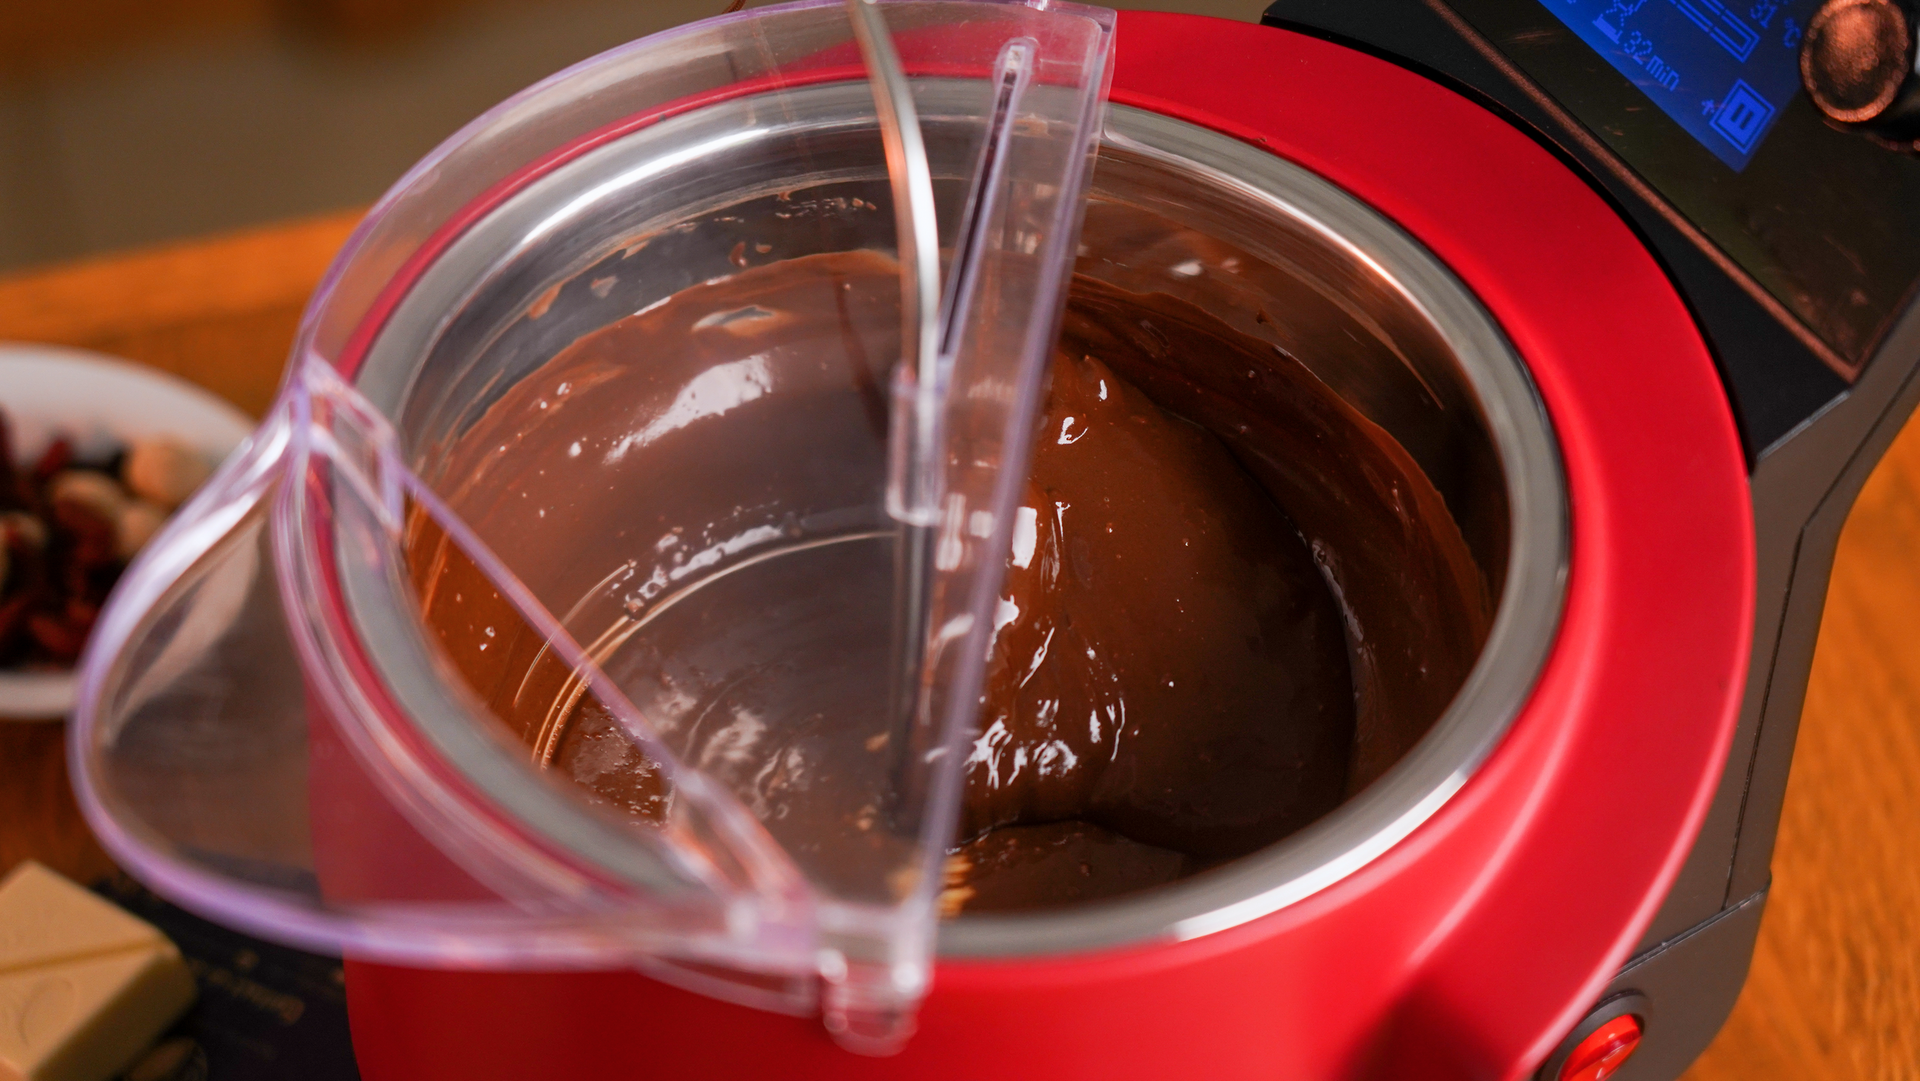 Load video: The Home Chocolat chocolate making at home experience